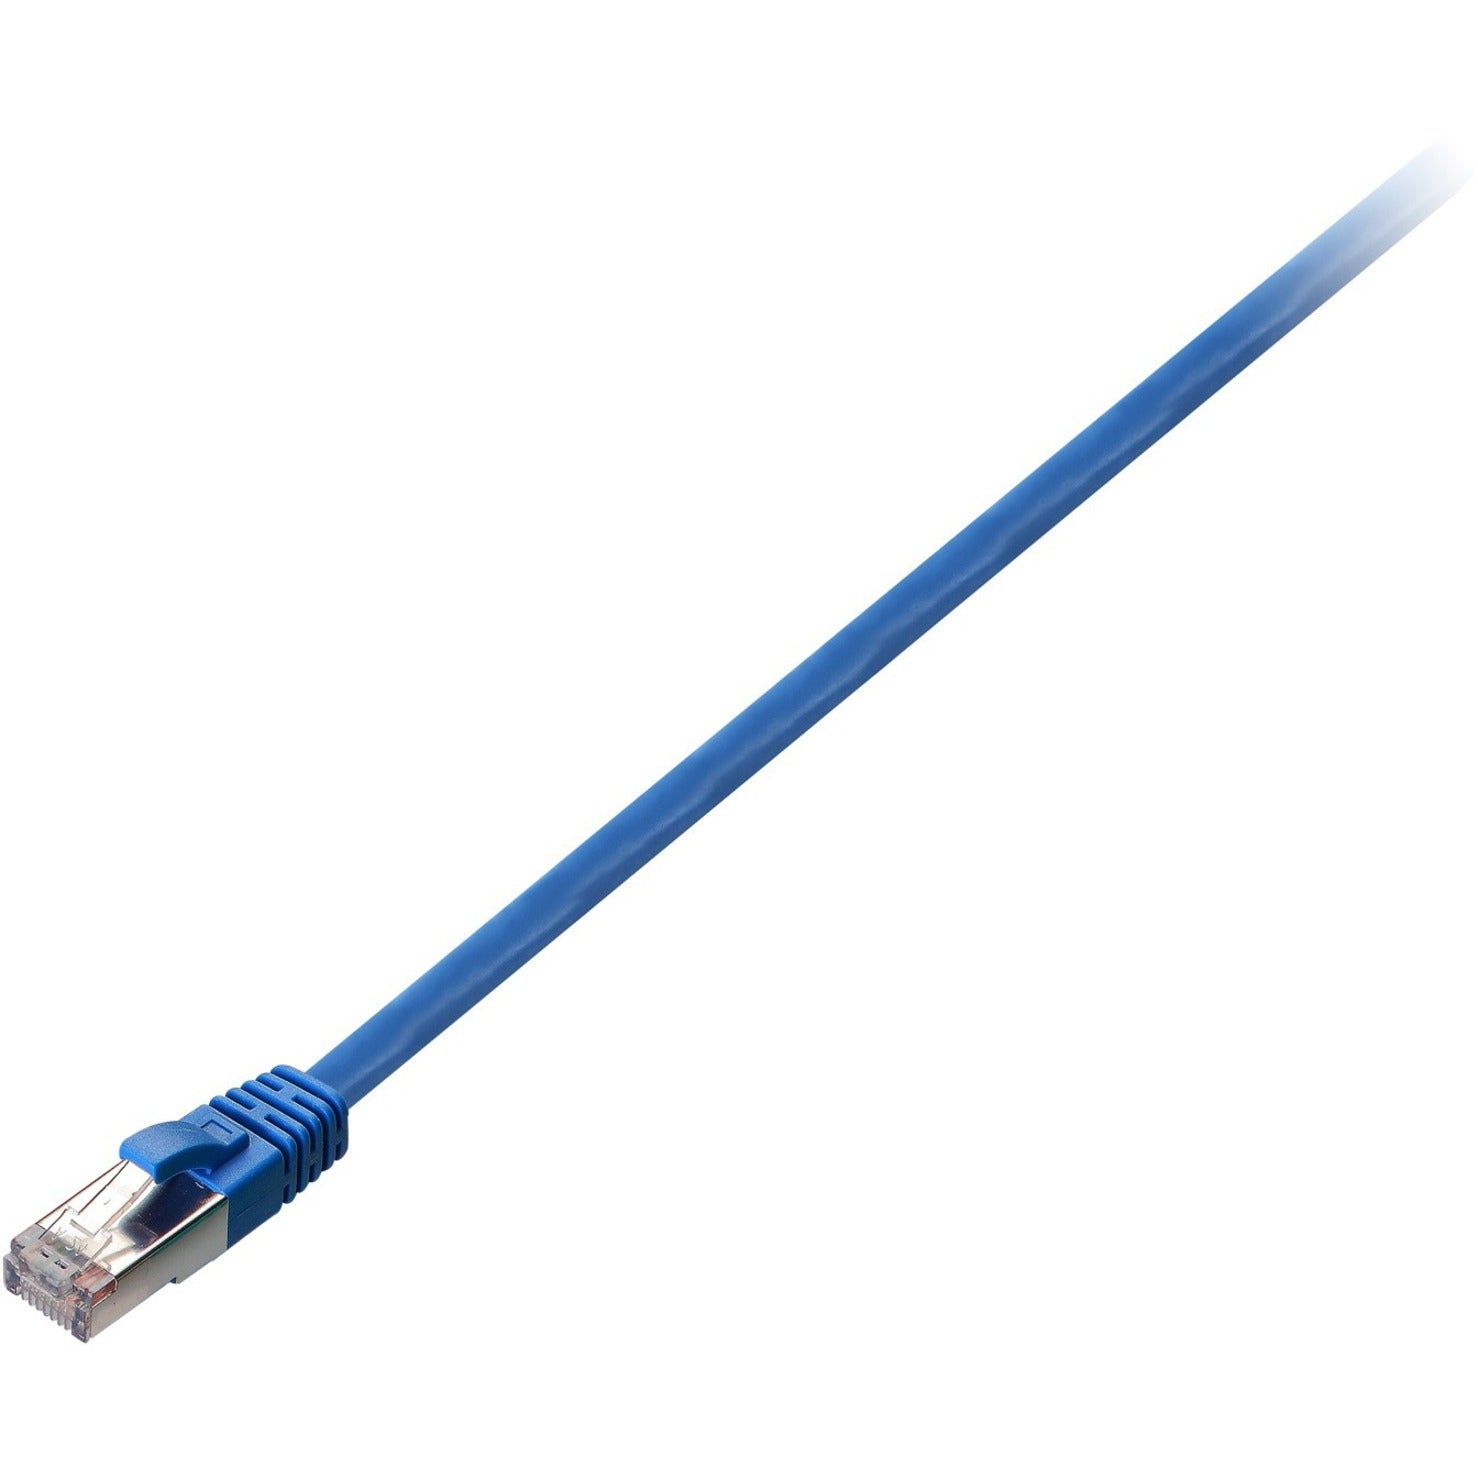 V7 V7CAT6STP-05M-BLU-1N Blue Cat6 Shielded (STP) Cable RJ45 Male to RJ45 Male 5m 16.4ft, Strain Relief, Locking Latch, Crosstalk Protection, Noise Reducing